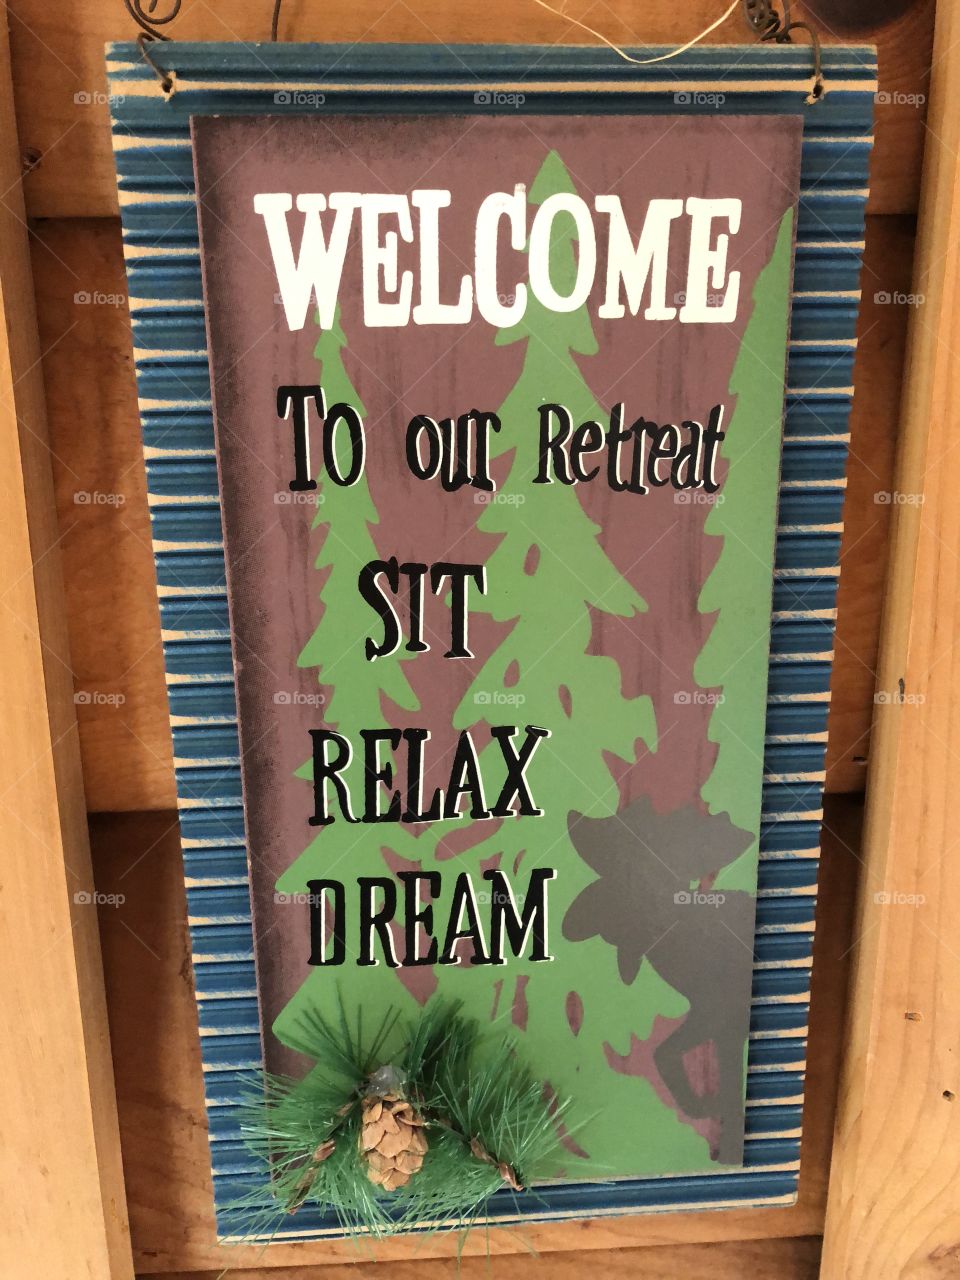 Sit relax dream sign